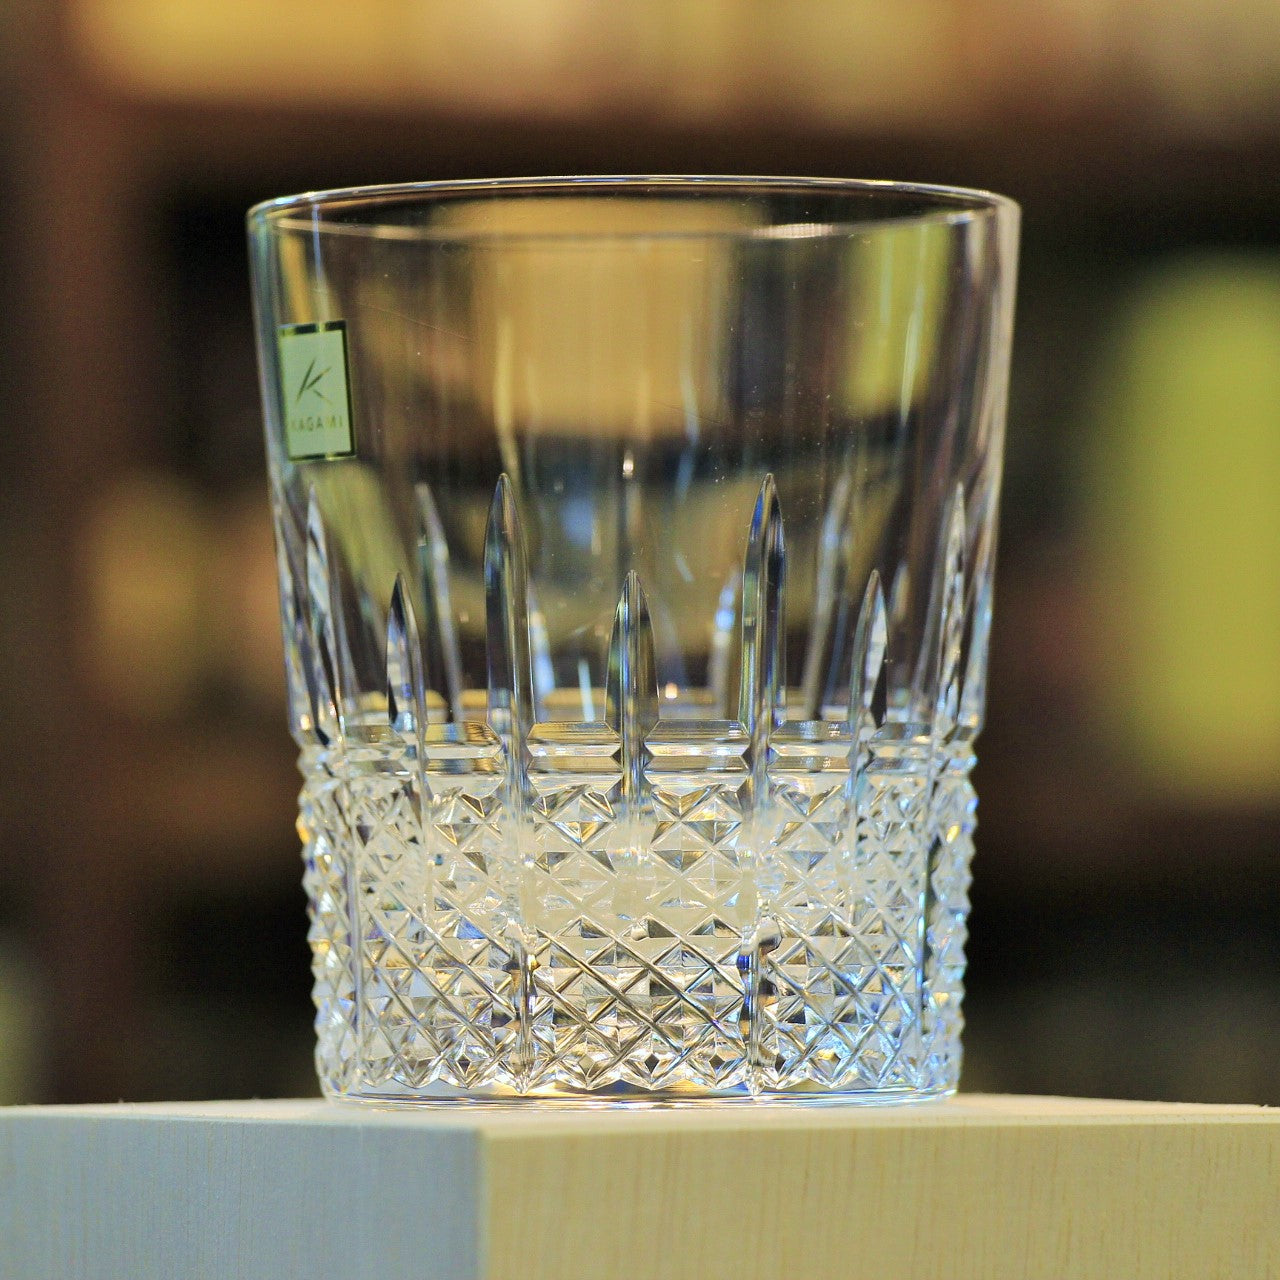 This Kagami Crystal Whisky Glass beautiful hand cut glass comes in a wooden gift box. Perfect for enjoying a glass of whisky either straight up or on the rocks! Also perfect for other iced drinks. A great gift for the whisky lover.